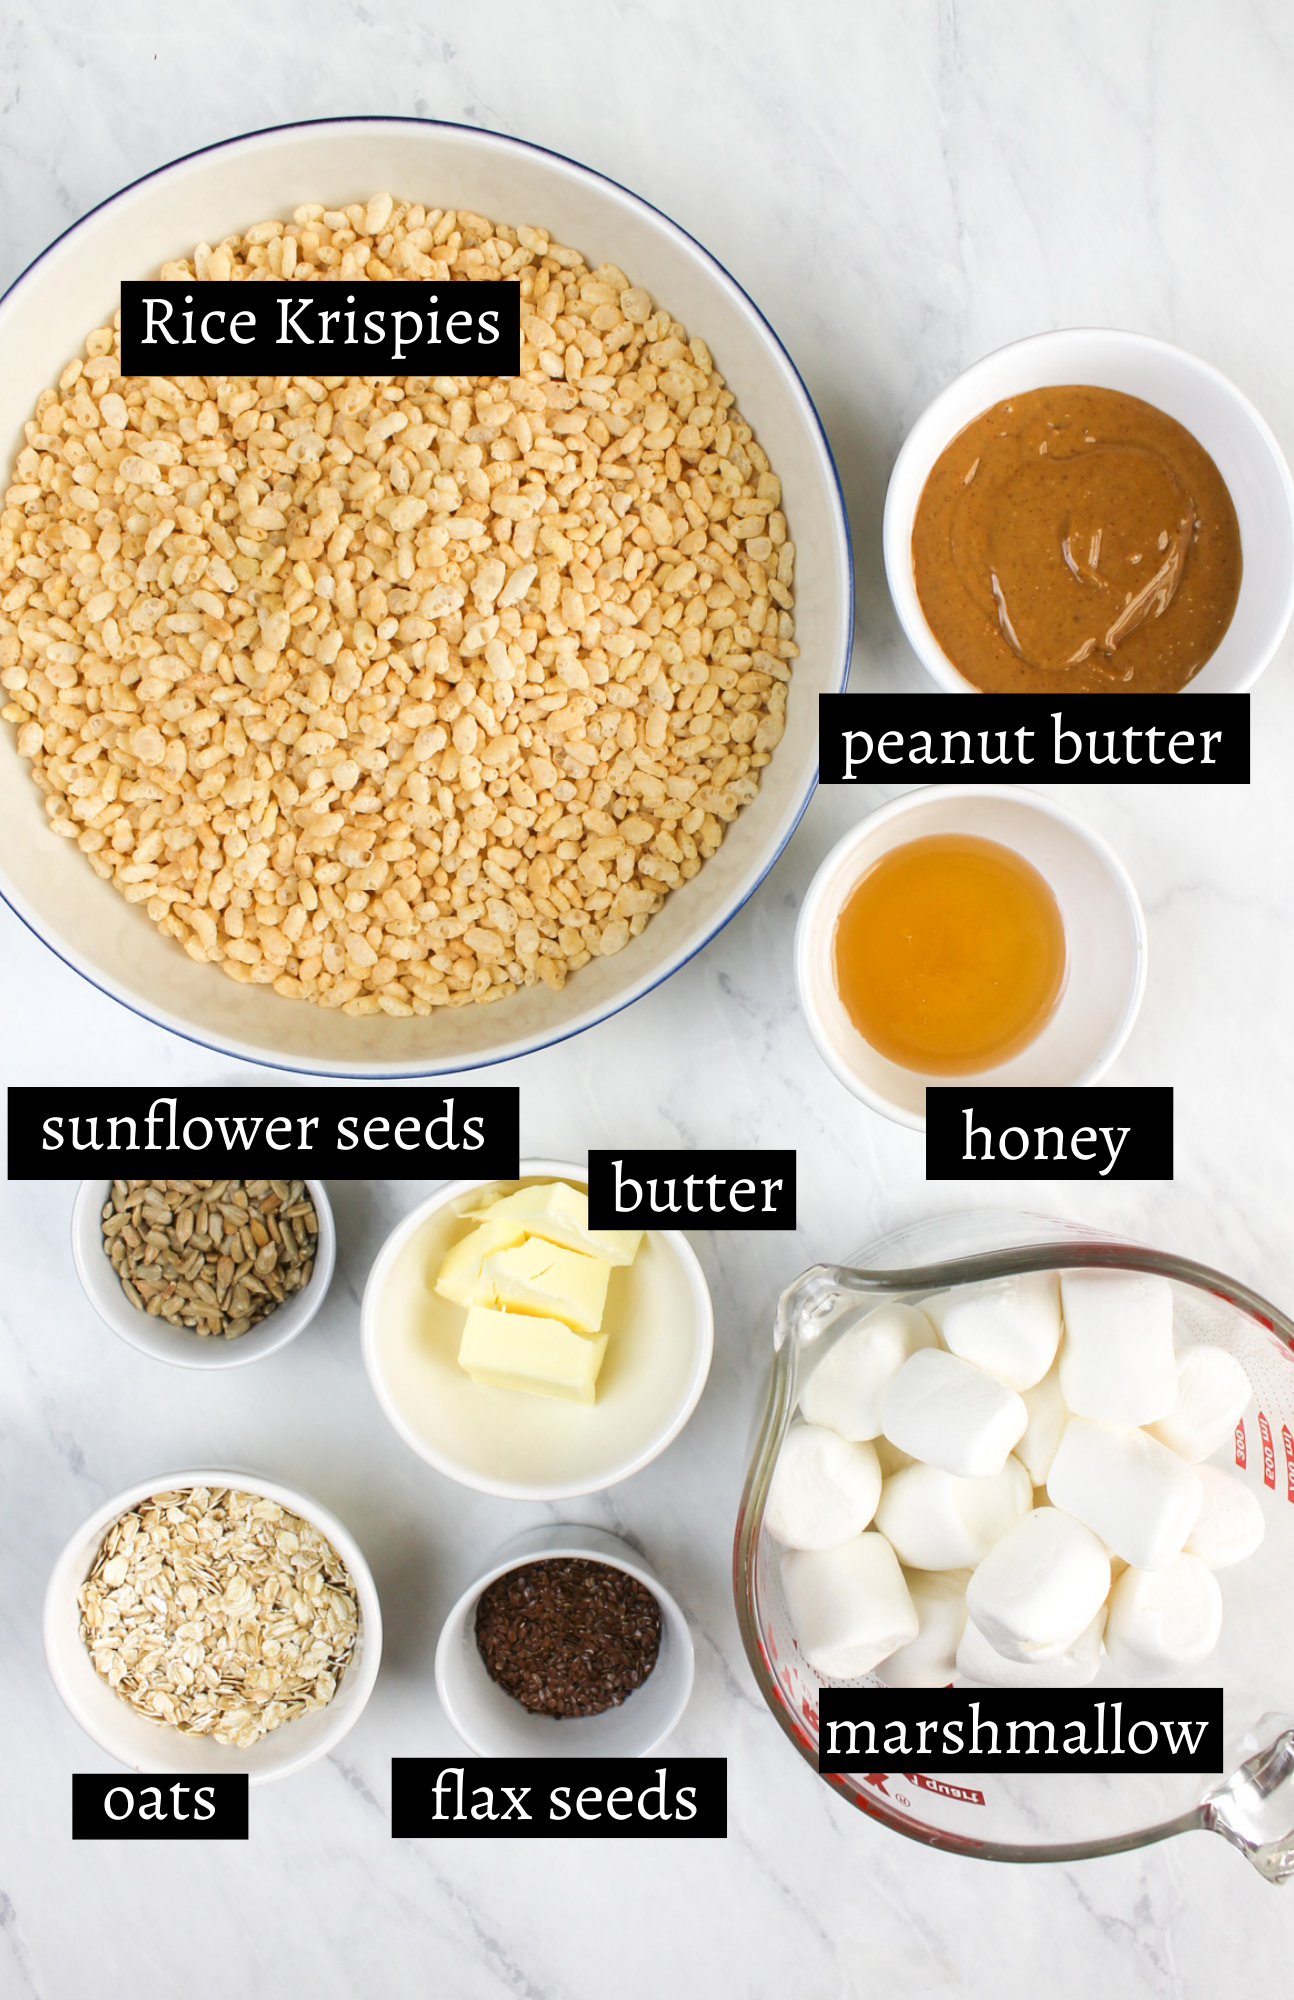 Labeled ingredients for Protein Rice Krispies Treats.